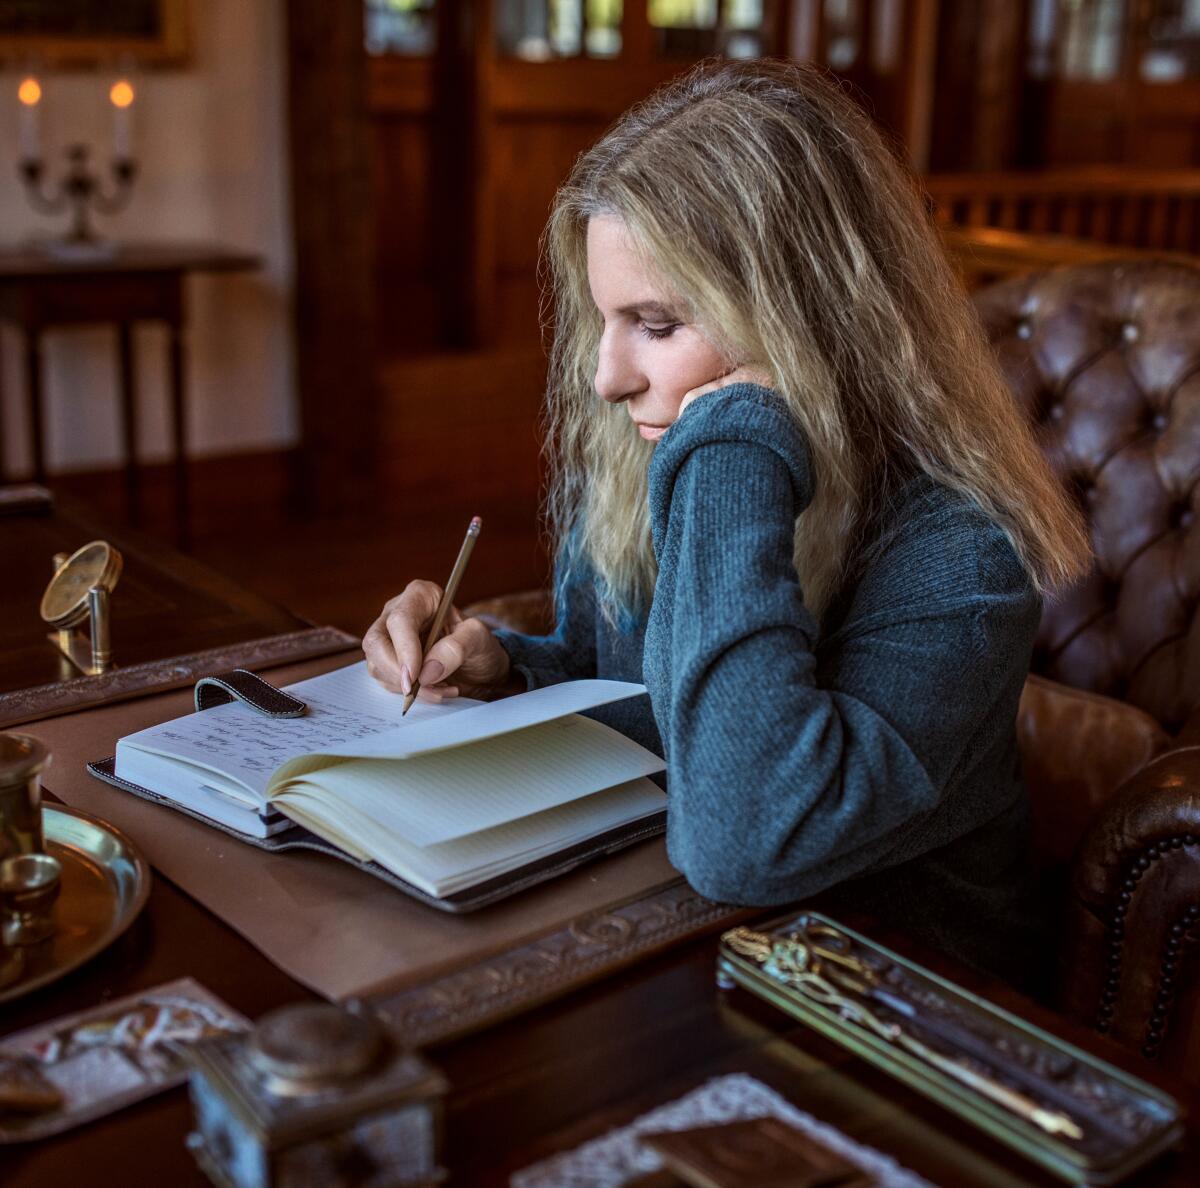 Barbra Streisand sits at a desk writing in a notebook.